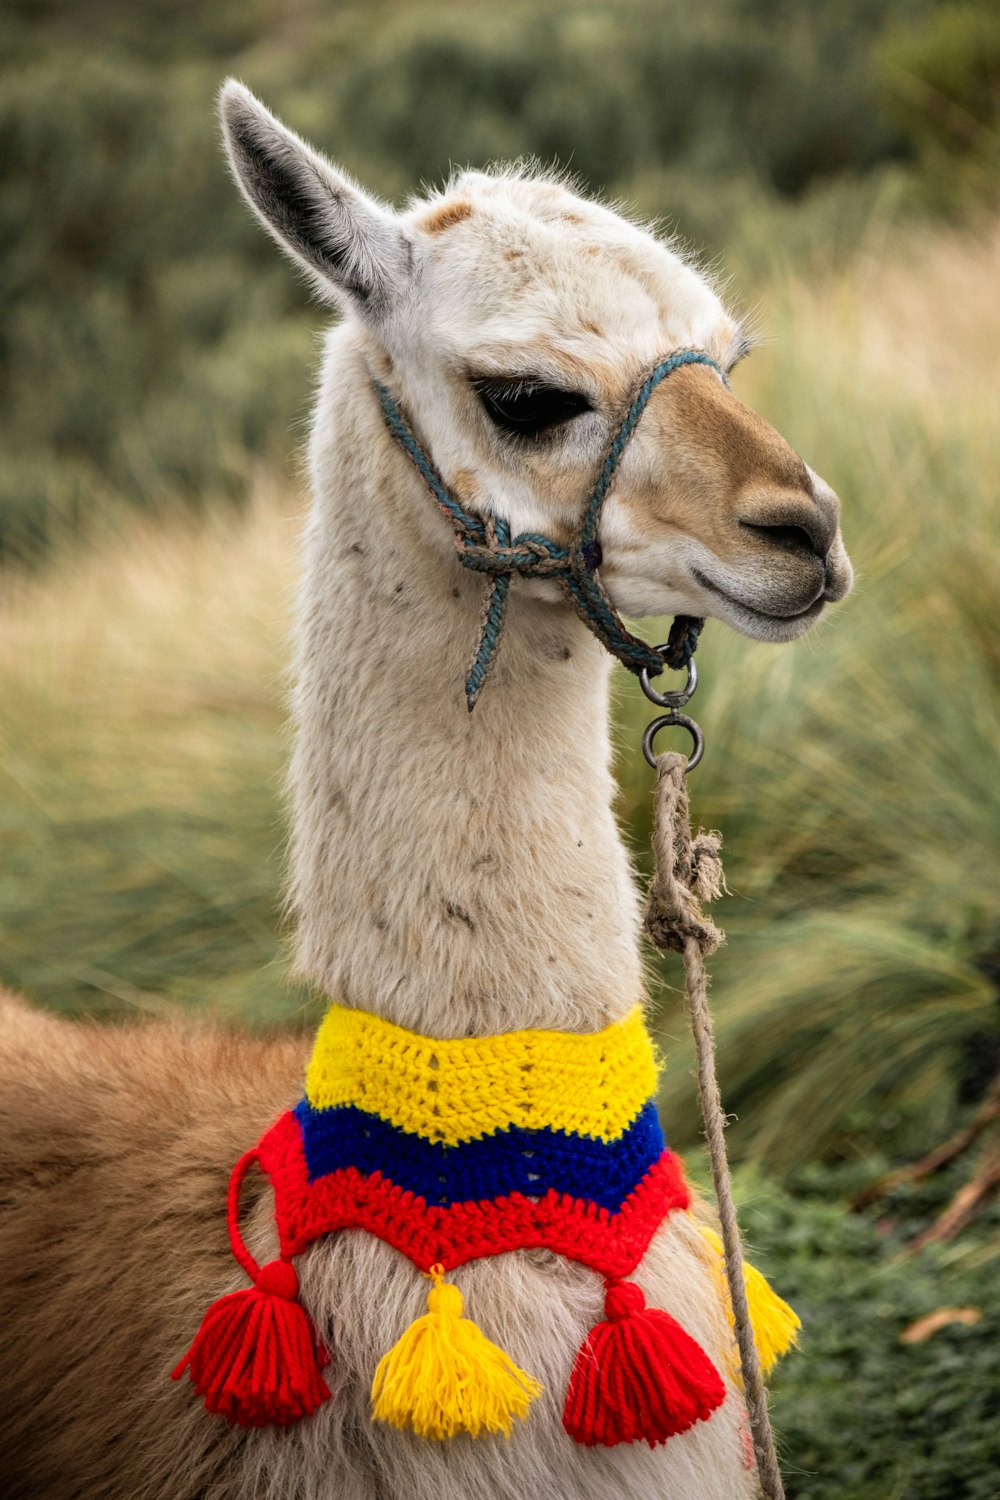 a llama wearing a colorful hat and scarf